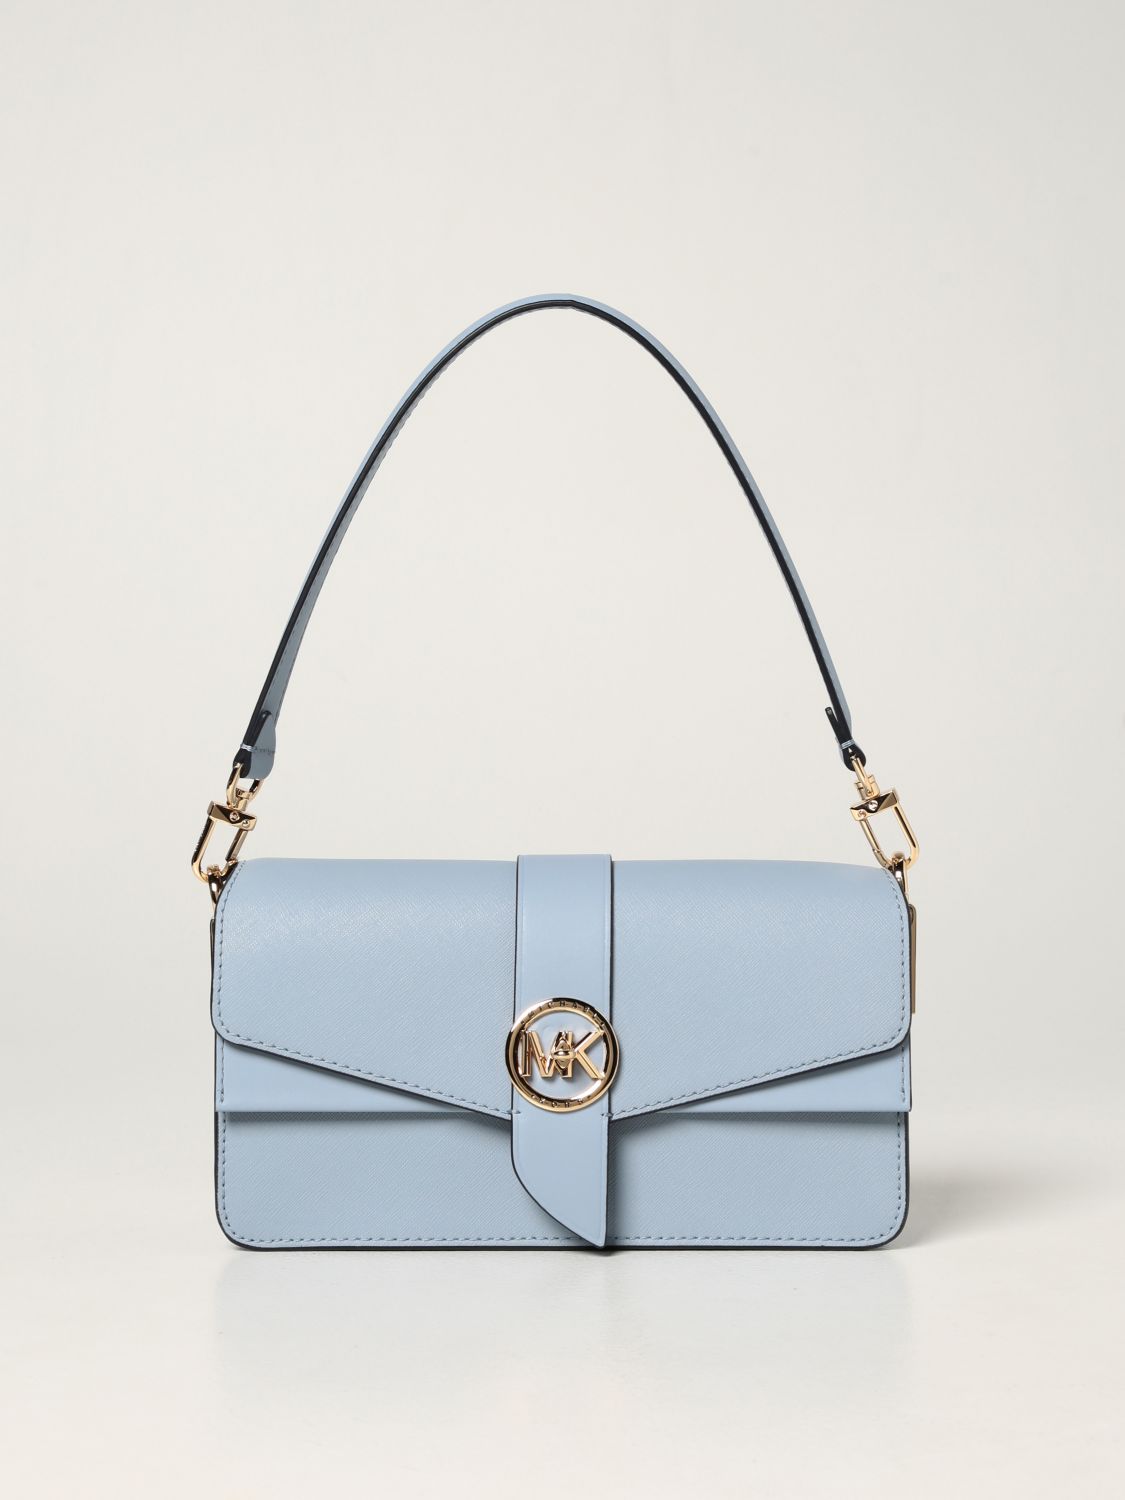 MICHAEL KORS: Greenwich Michael bag in saffiano leather - Gnawed